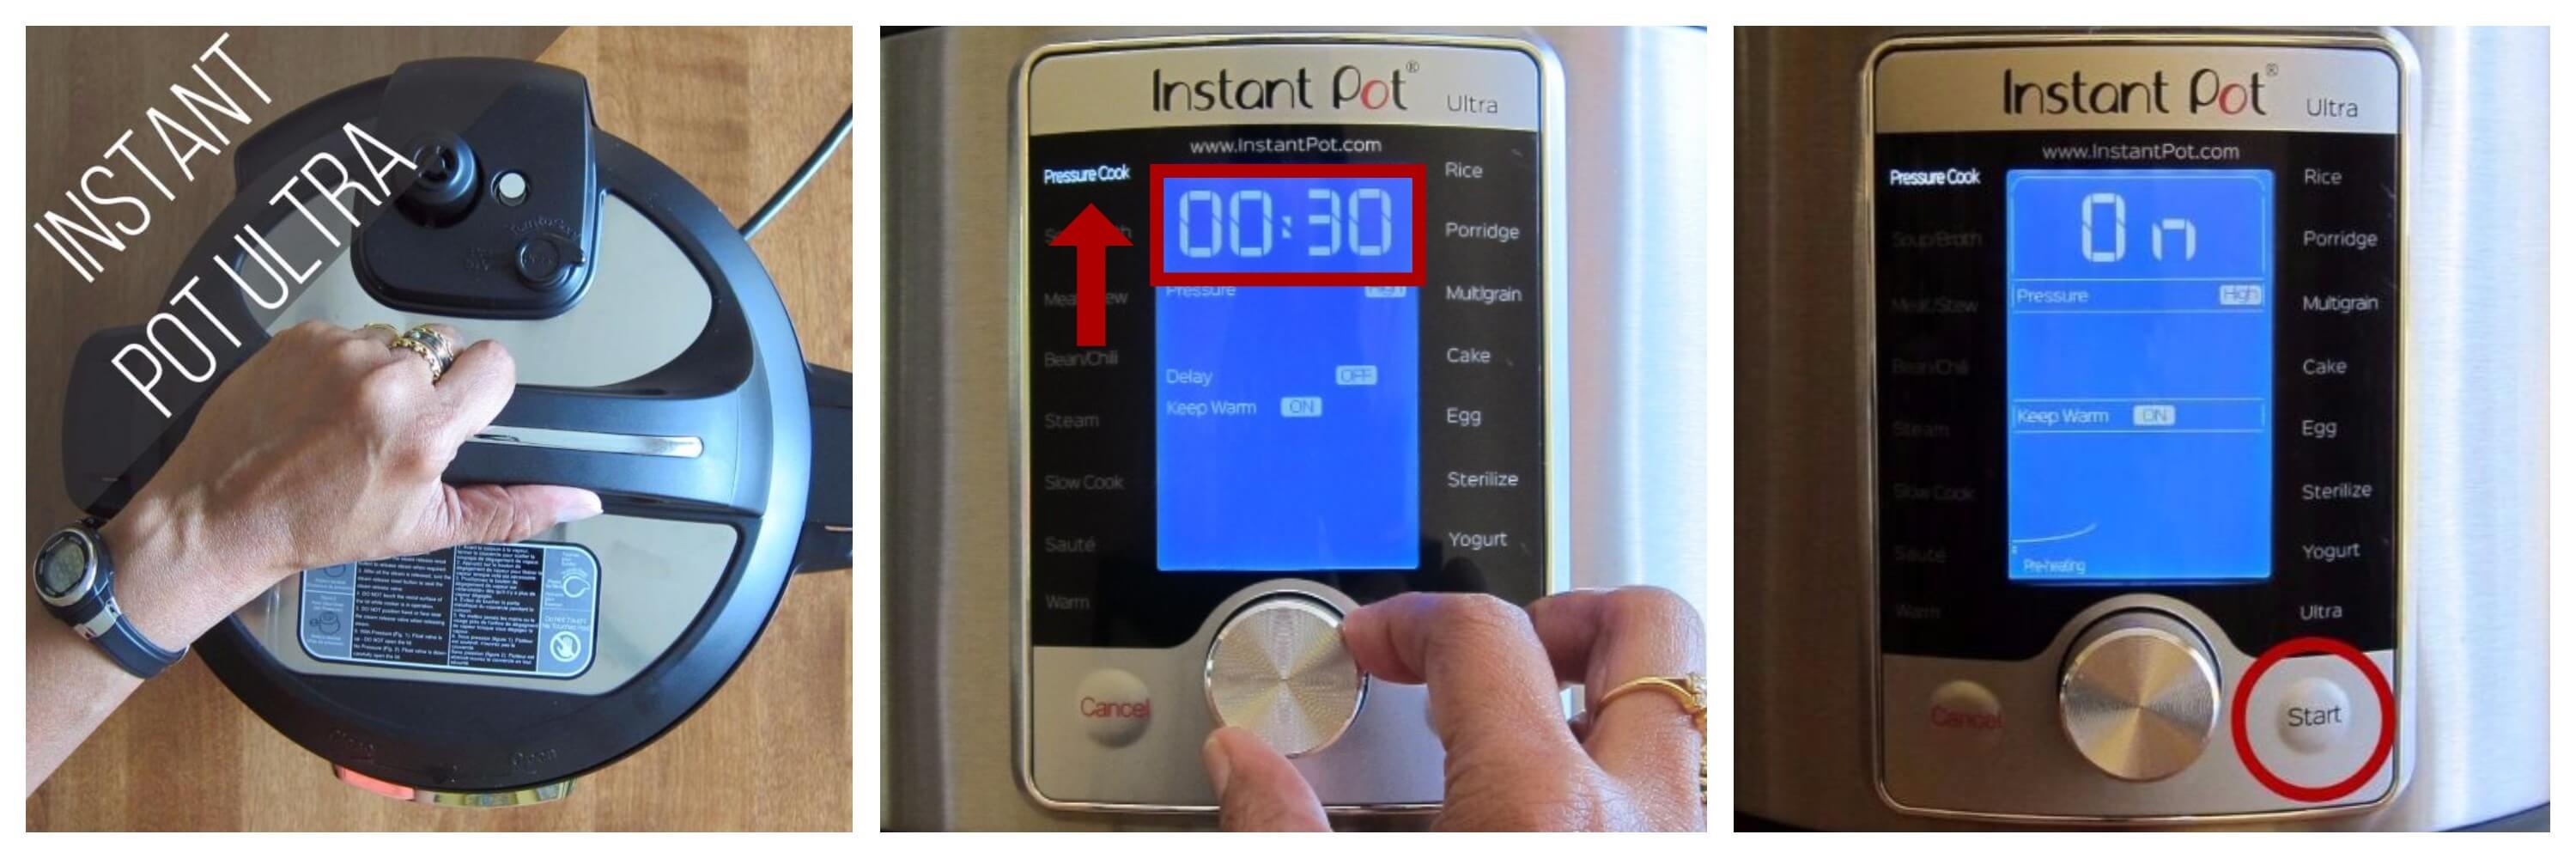 Instant Pot Ultra pressure cook 30 minutes collage - close Instant Pot Ultra, set time to 00:30 and select Pressure Cook, press start - Paint the Kitchen Red